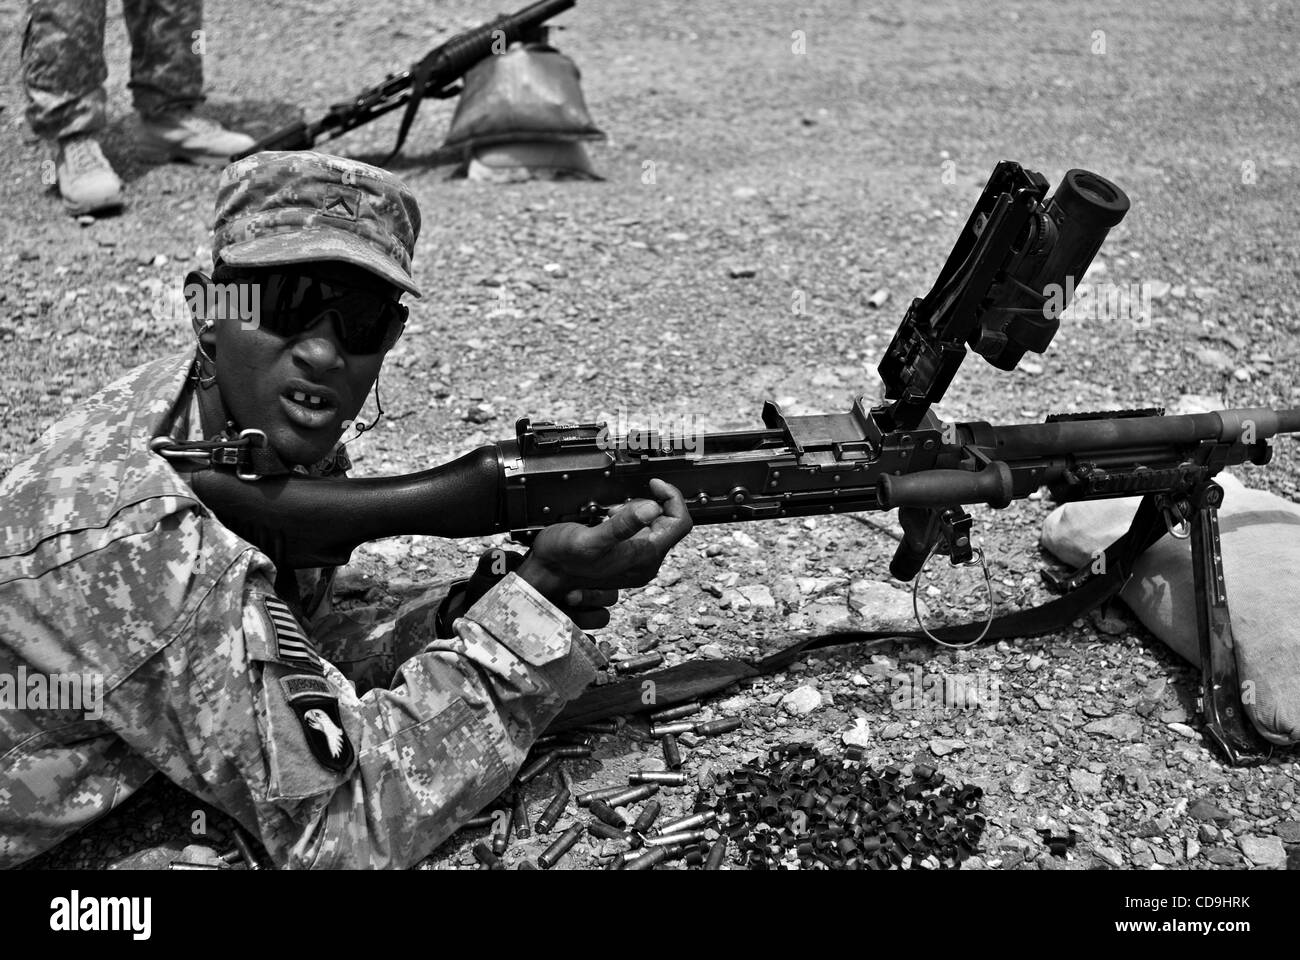 Pvt. MUSTAFA OMAR, an infantryman with Abu Company, 1st Battalion, 187th Infantry Regiment, looks at his squad leader while training on the M240B machine at the weapons range on Forward Operating Base Boris. Stock Photo